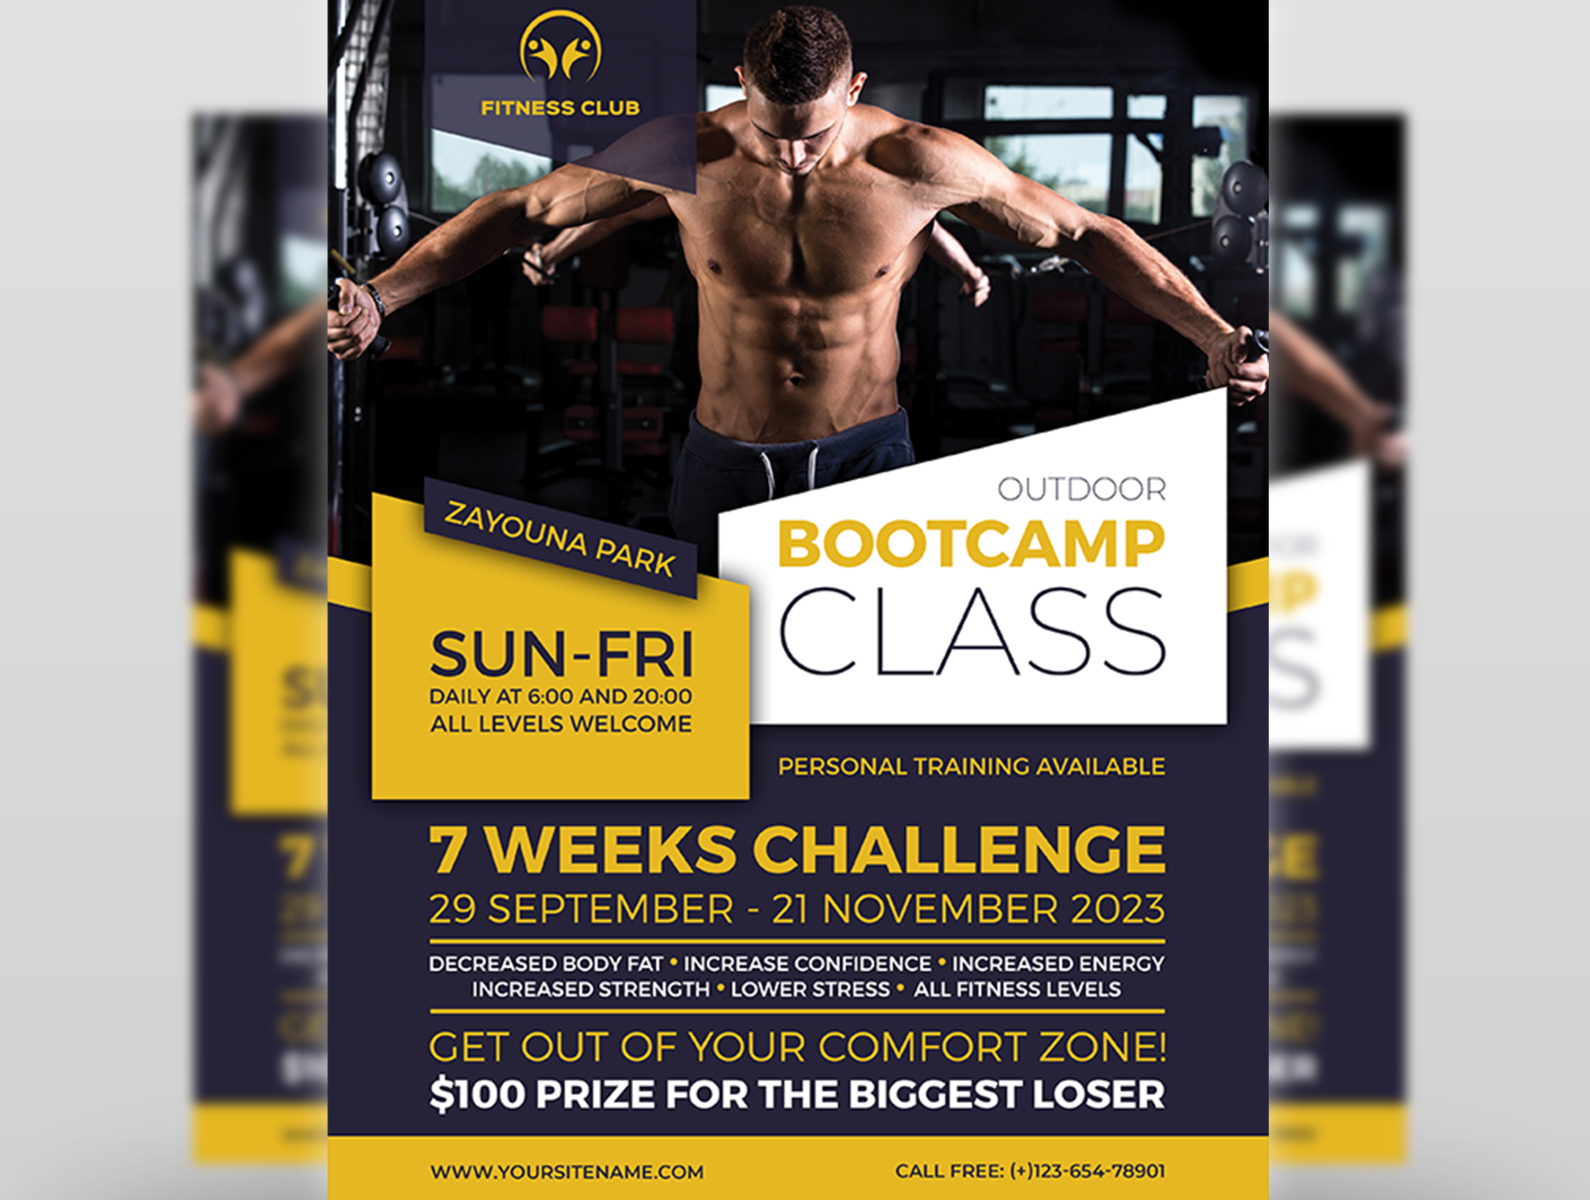 Bootcamp Fitness Flyer Template by OWPictures on Dribbble Within Fitness Boot Camp Flyer Template